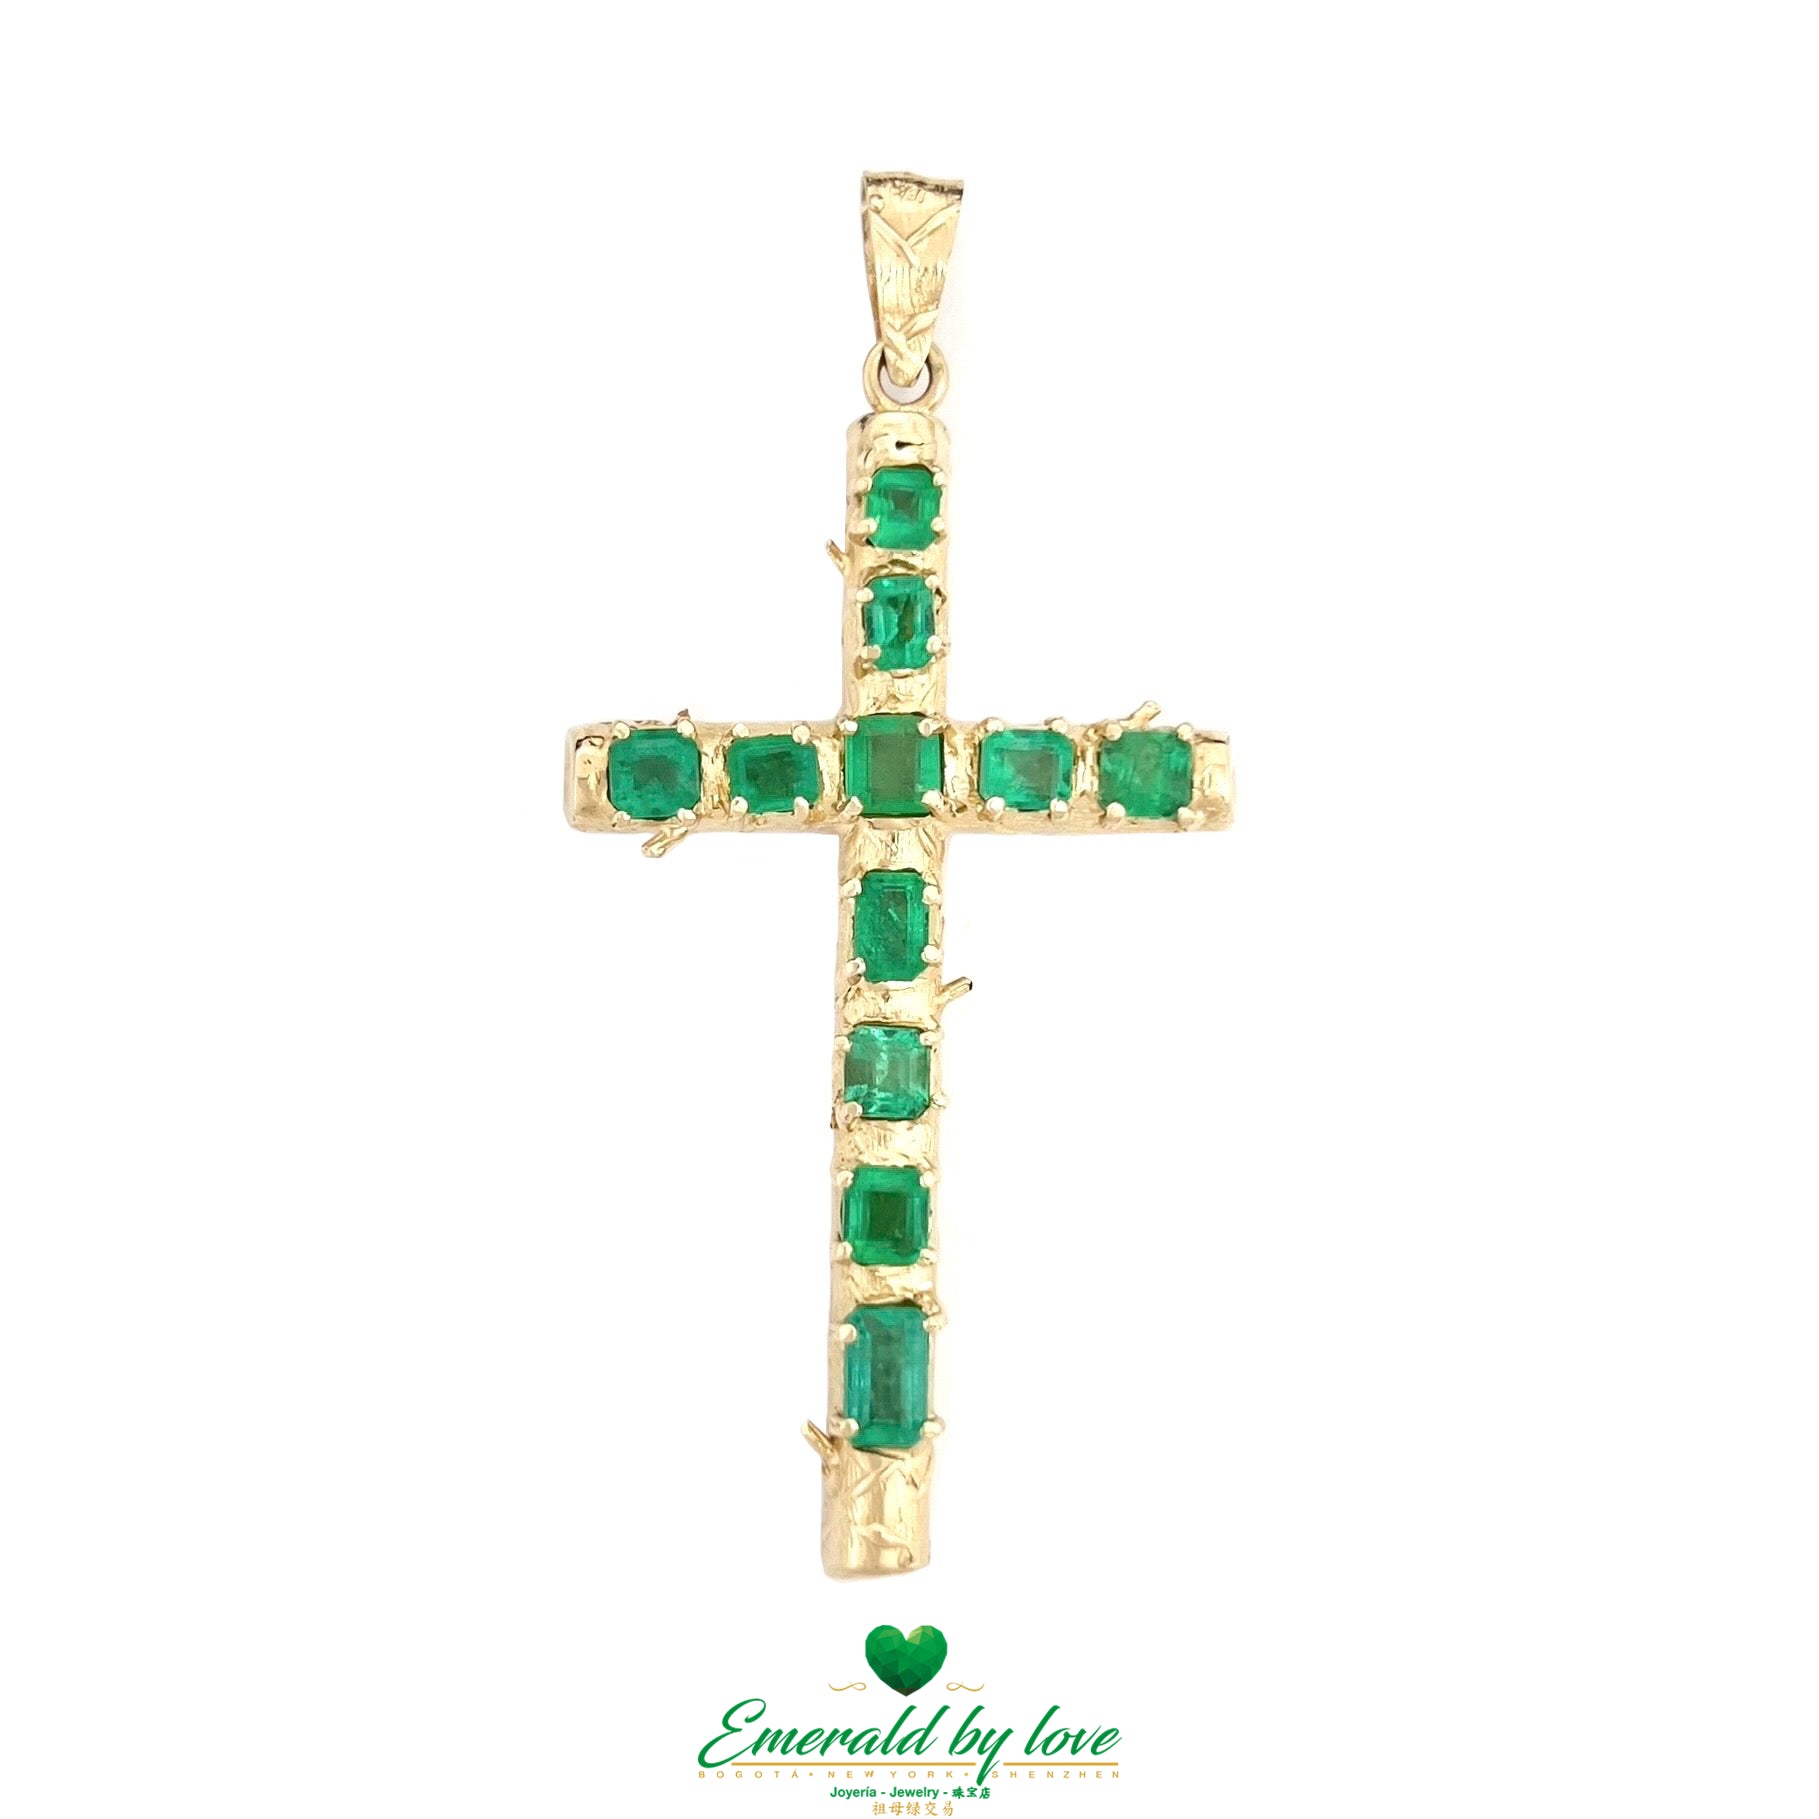 Captivating 18k Yellow Gold Cross Pendant Featuring Colombian Crystal Emeralds